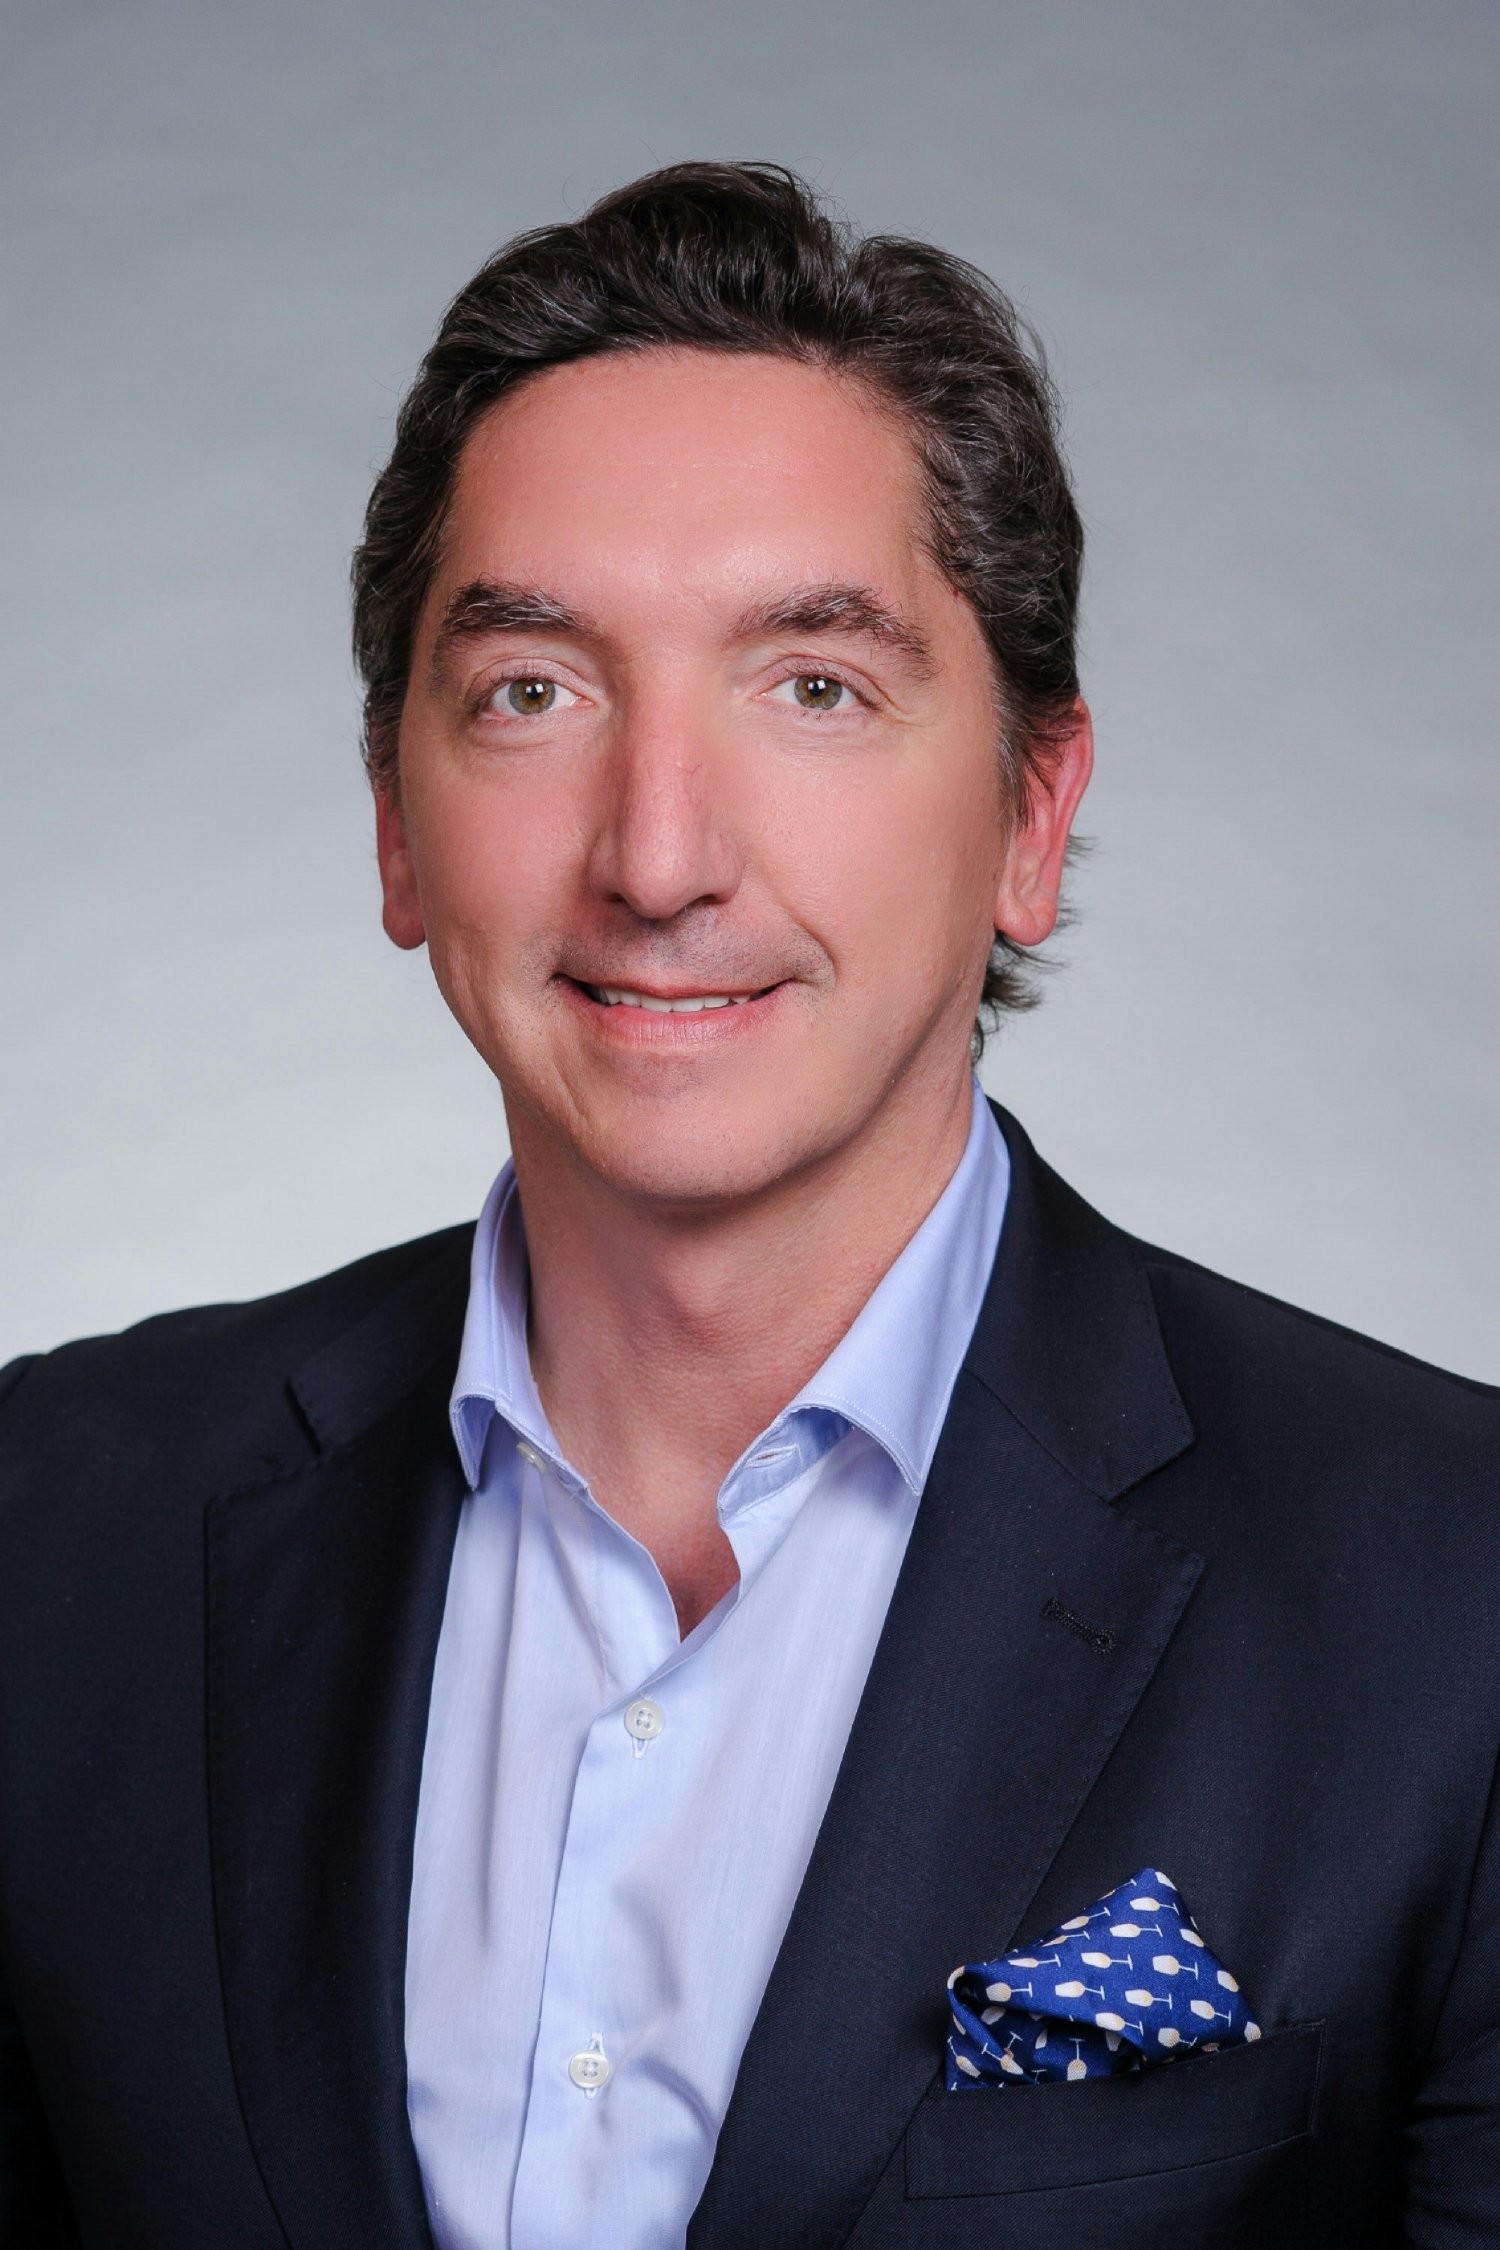 ZIMMER BIOMET PRESIDENT AND CHIEF EXECUTIVE OFFICER, IVAN TORNOS